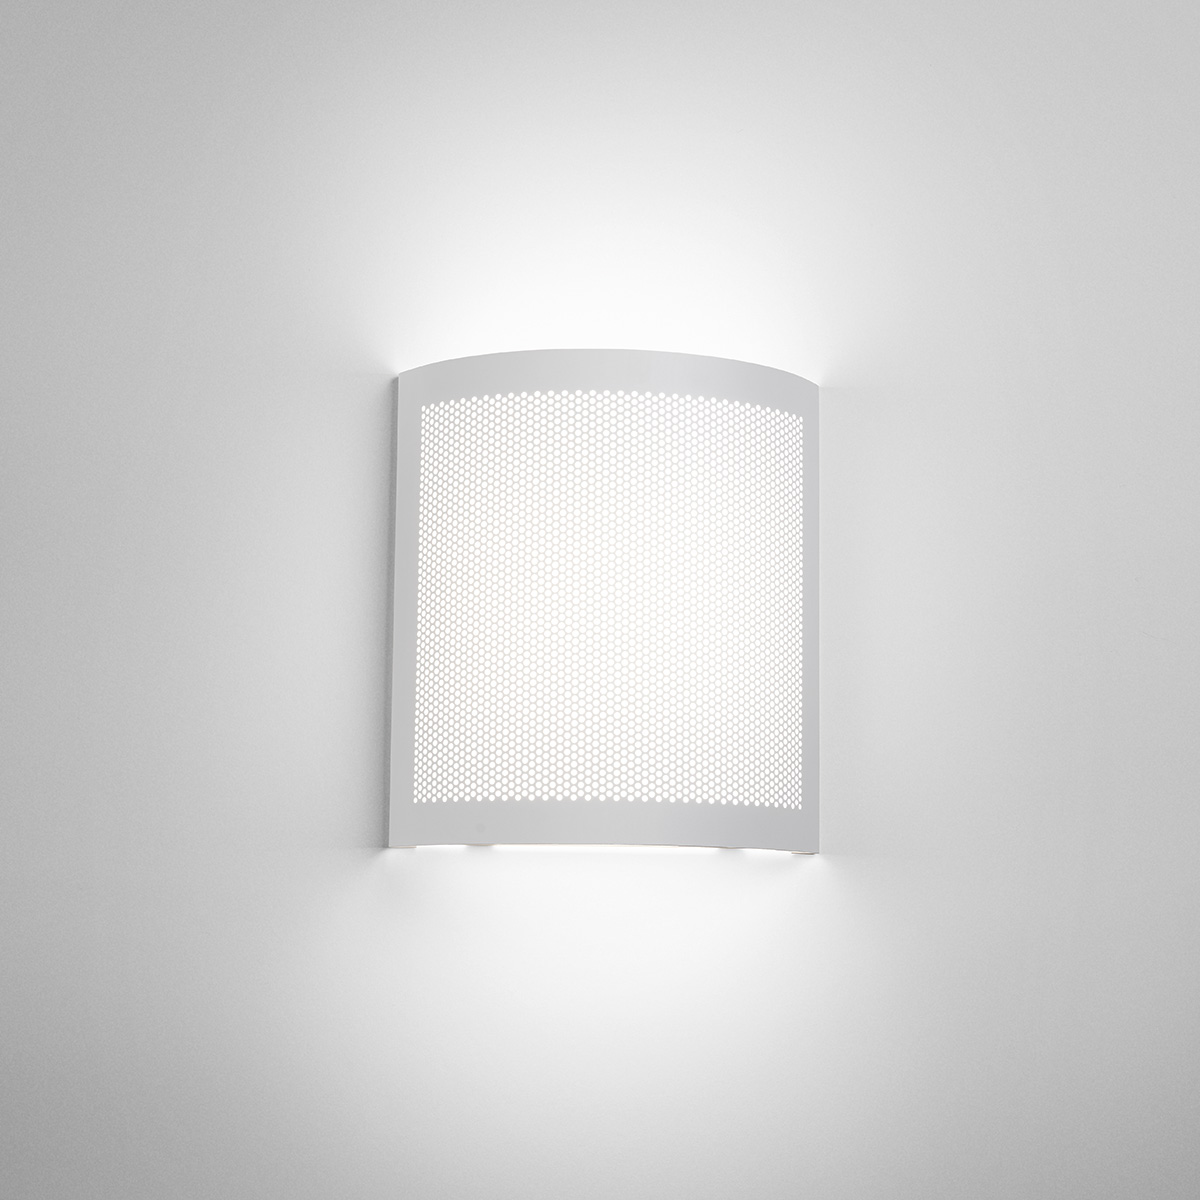 A square indirect wall sconce with a curved, perforated front plate